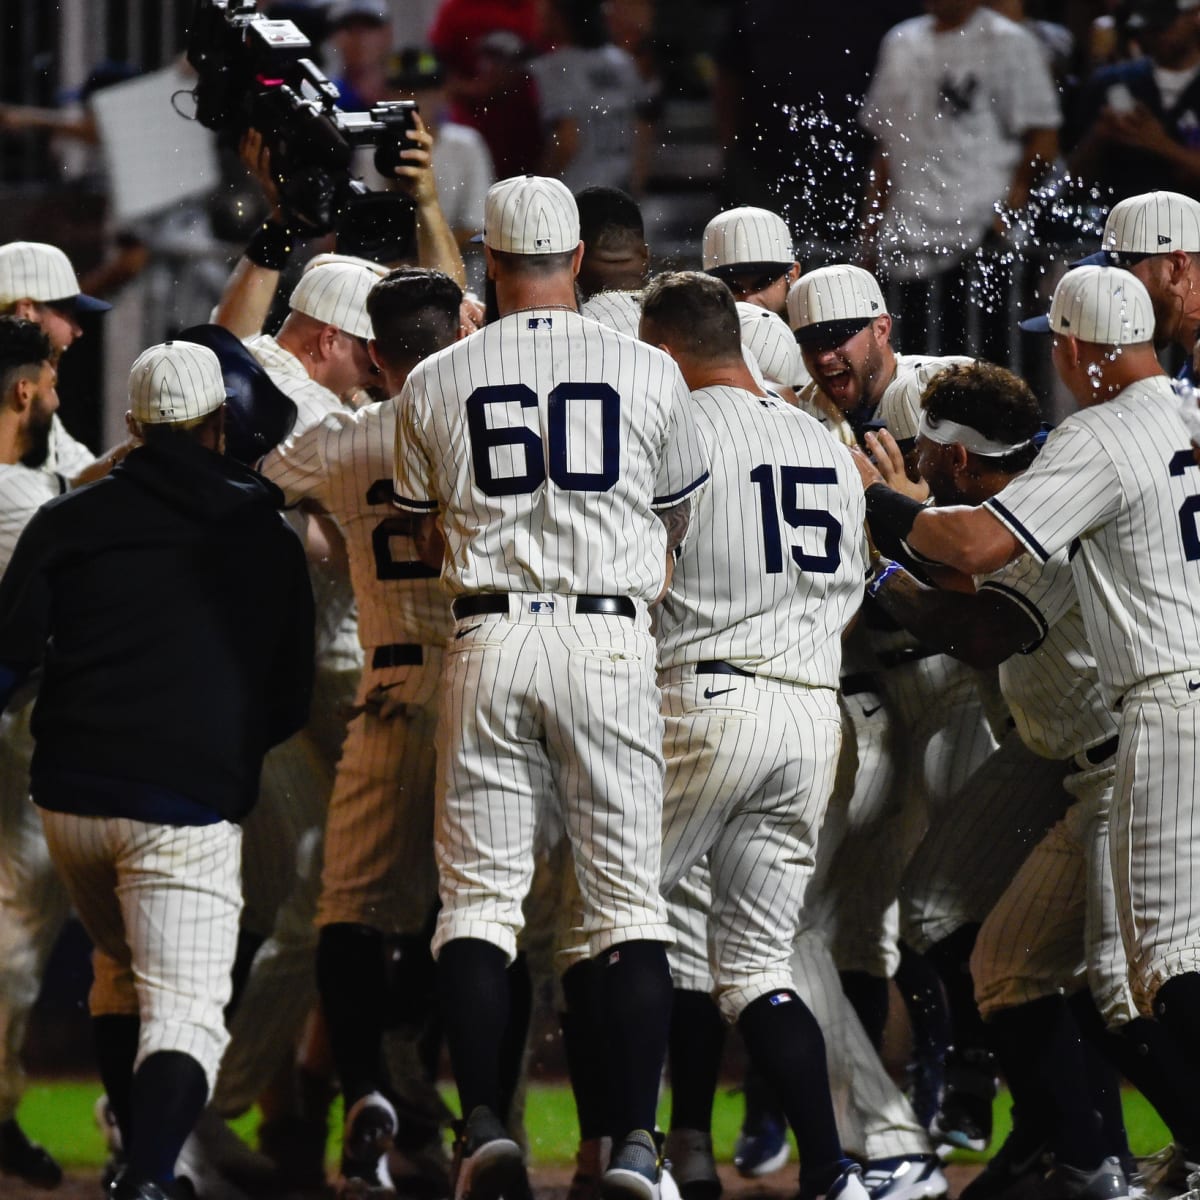 Walkoff homer leads White Sox over Yankees in Field of Dreams game